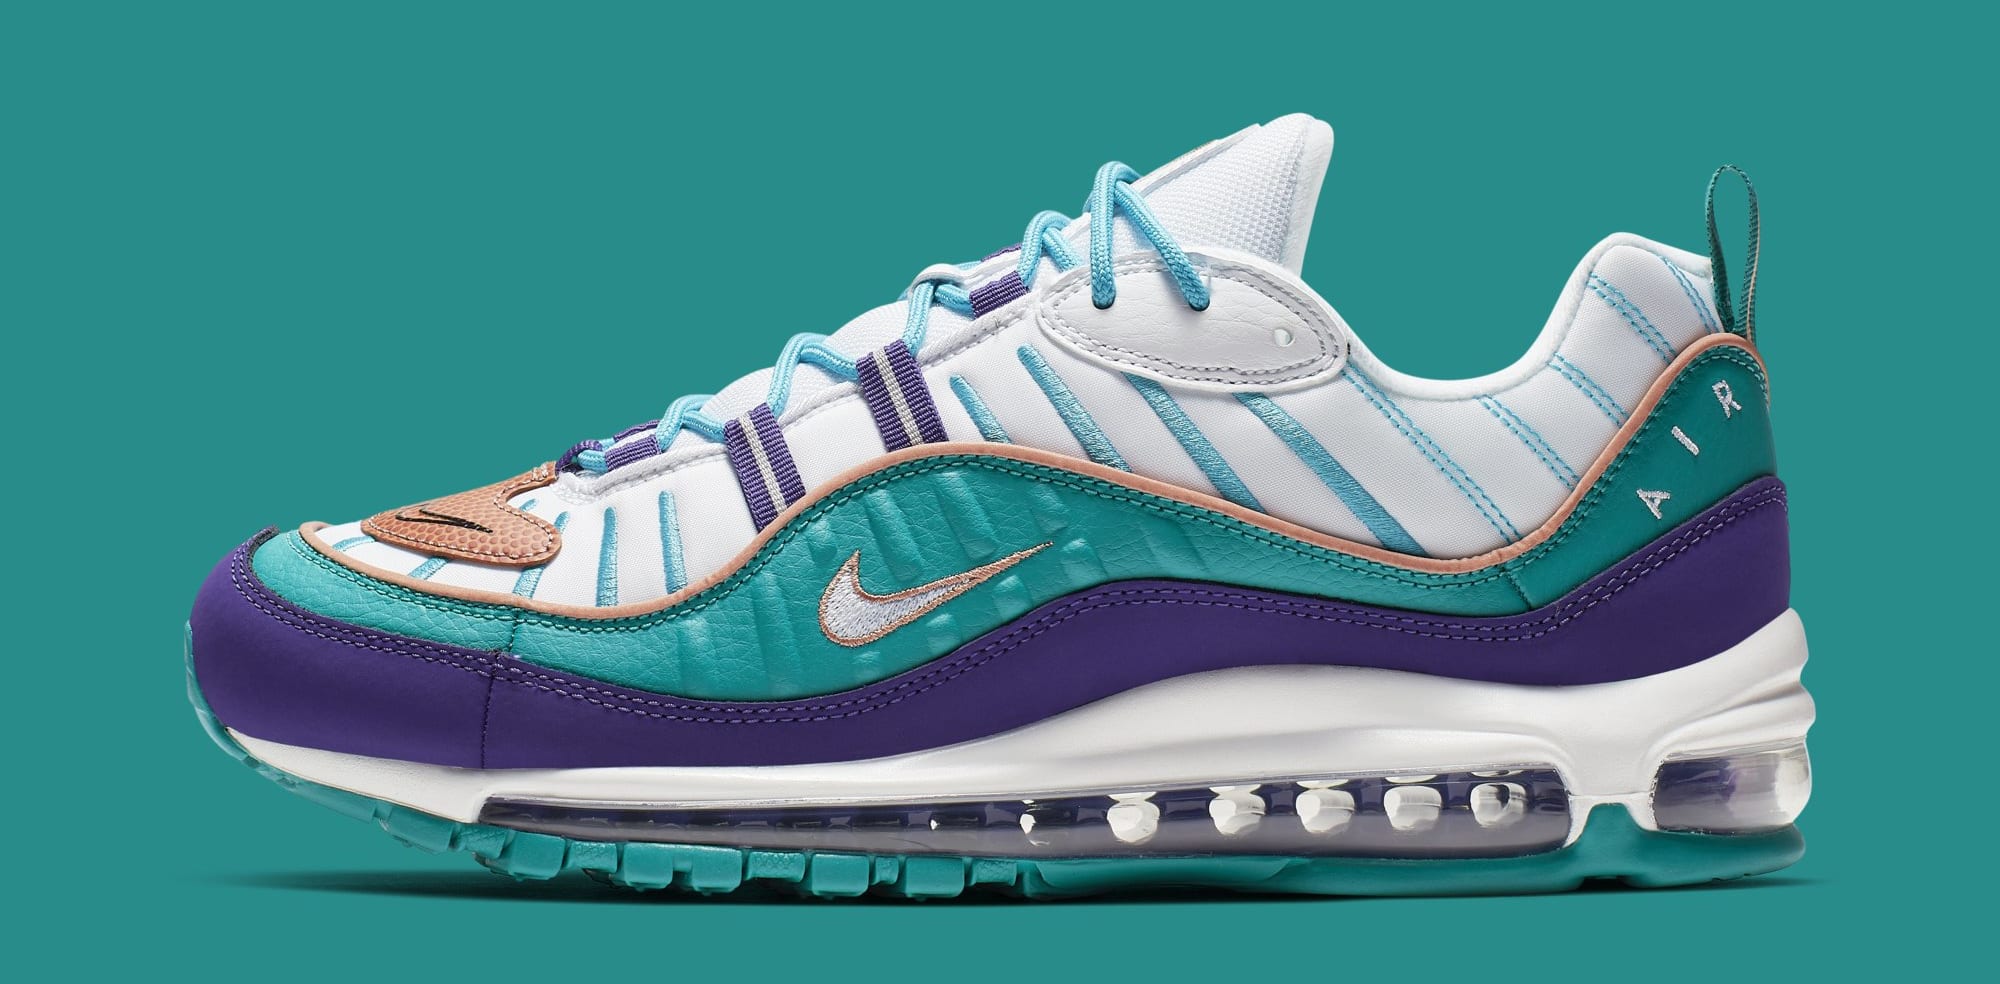 ødemark Bare gør Give Charlotte Hornets Colors Cover This Air Max 98 | Complex